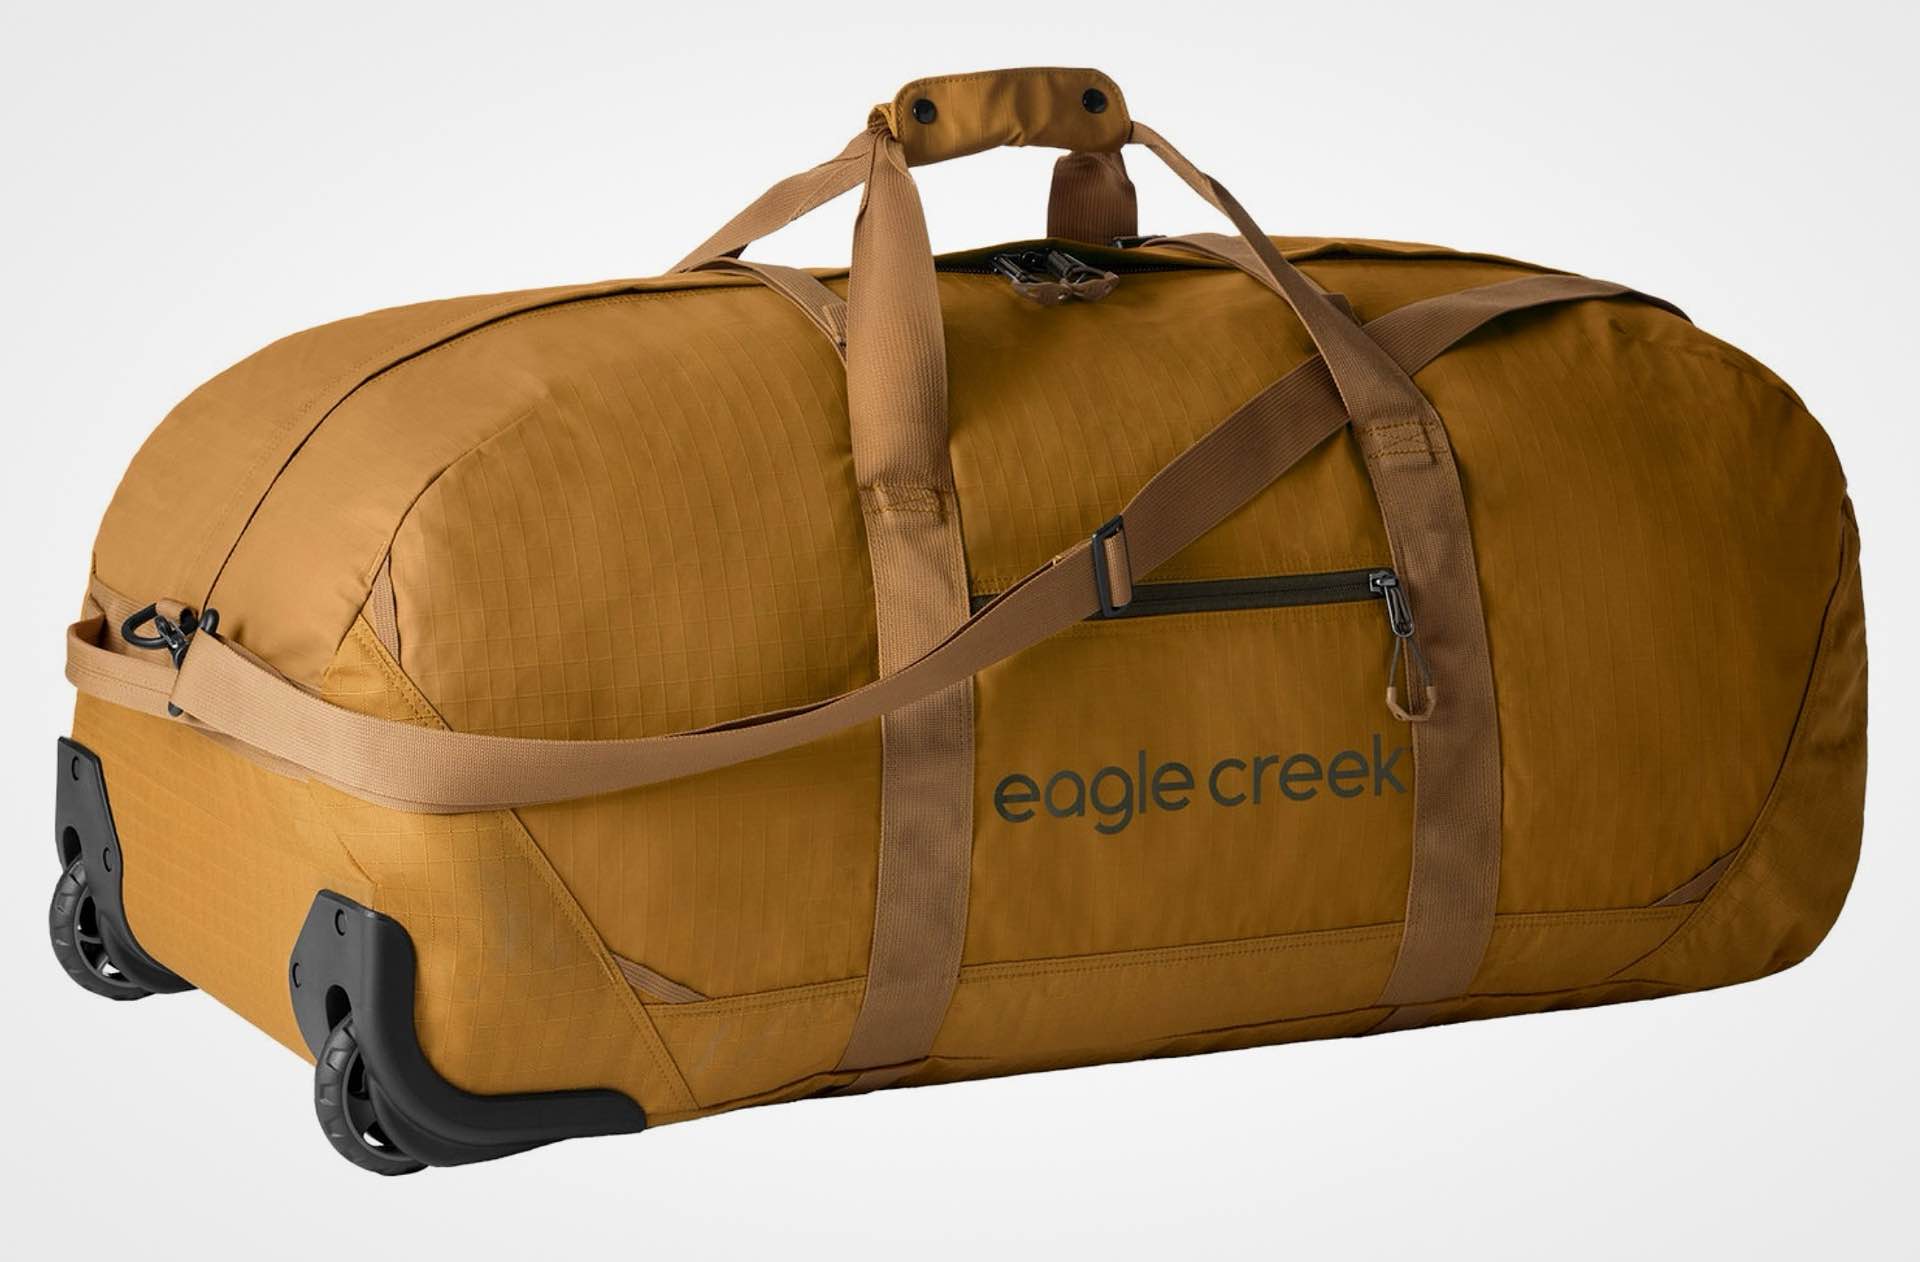 eagle-creek-has-refreshed-their-no-matter-what-rolling-duffel-bag